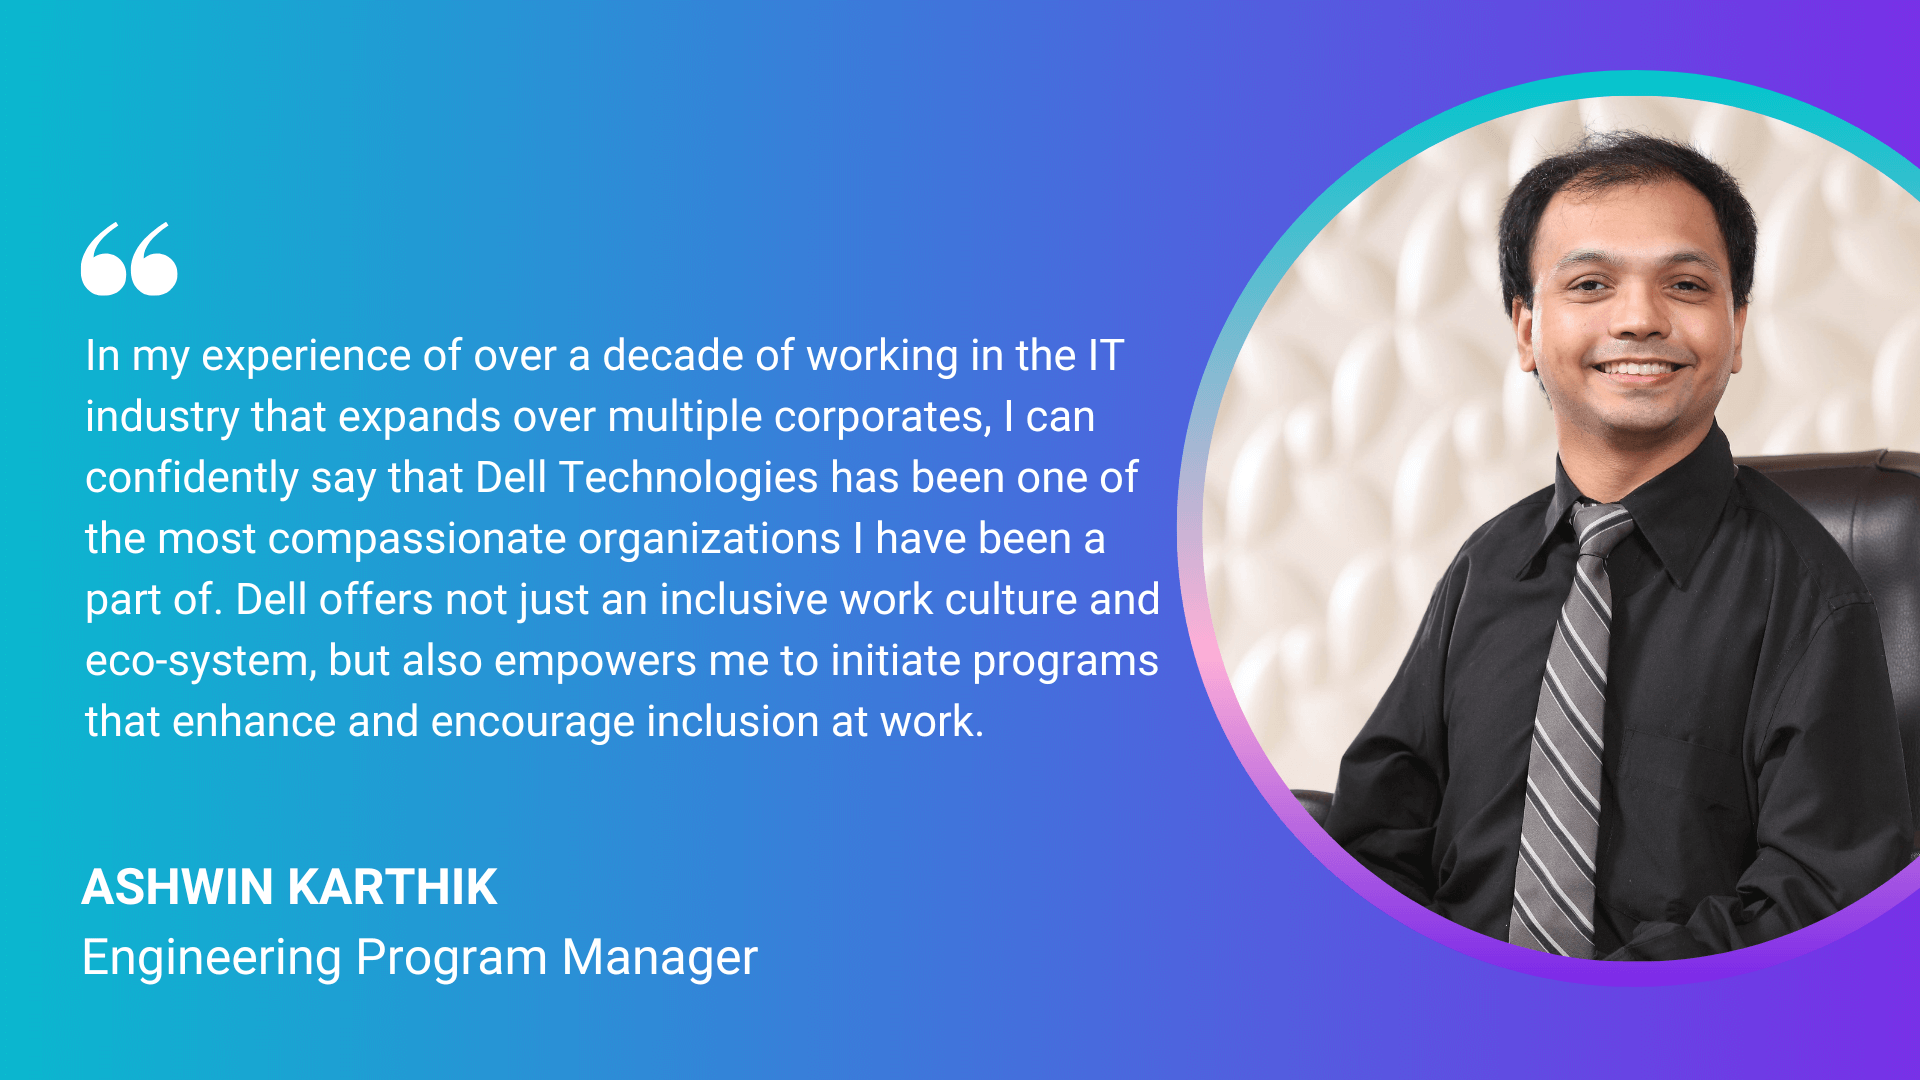 "In my experience of over a decade of working in the IT industry that expands over multiple corporates, I can confidently say that Dell Technologies has been one of the most compassionate organizations I have been a part of. Dell offers not just an inclusive work culture and eco-system, but also empowers me to initiate programs and enhance and encourage inclusion at work." Ashwin Karthik, Engineering Program Manager